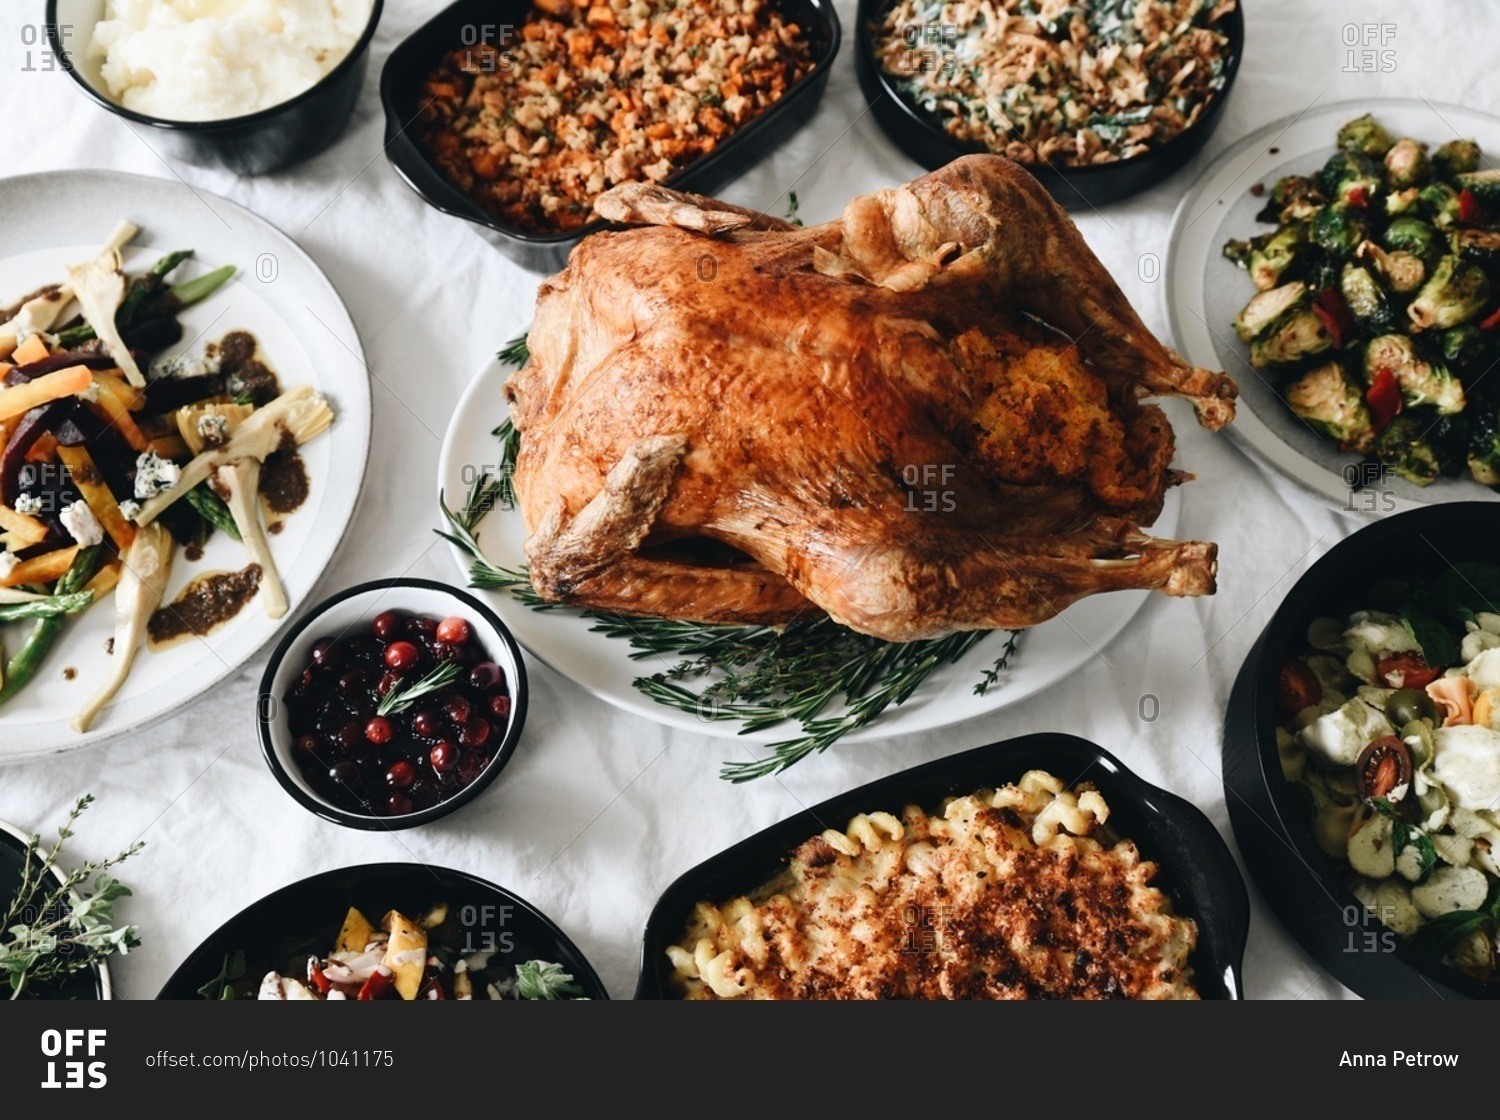 Overhead view of traditional Thanksgiving dinner food served on a table in front of a window